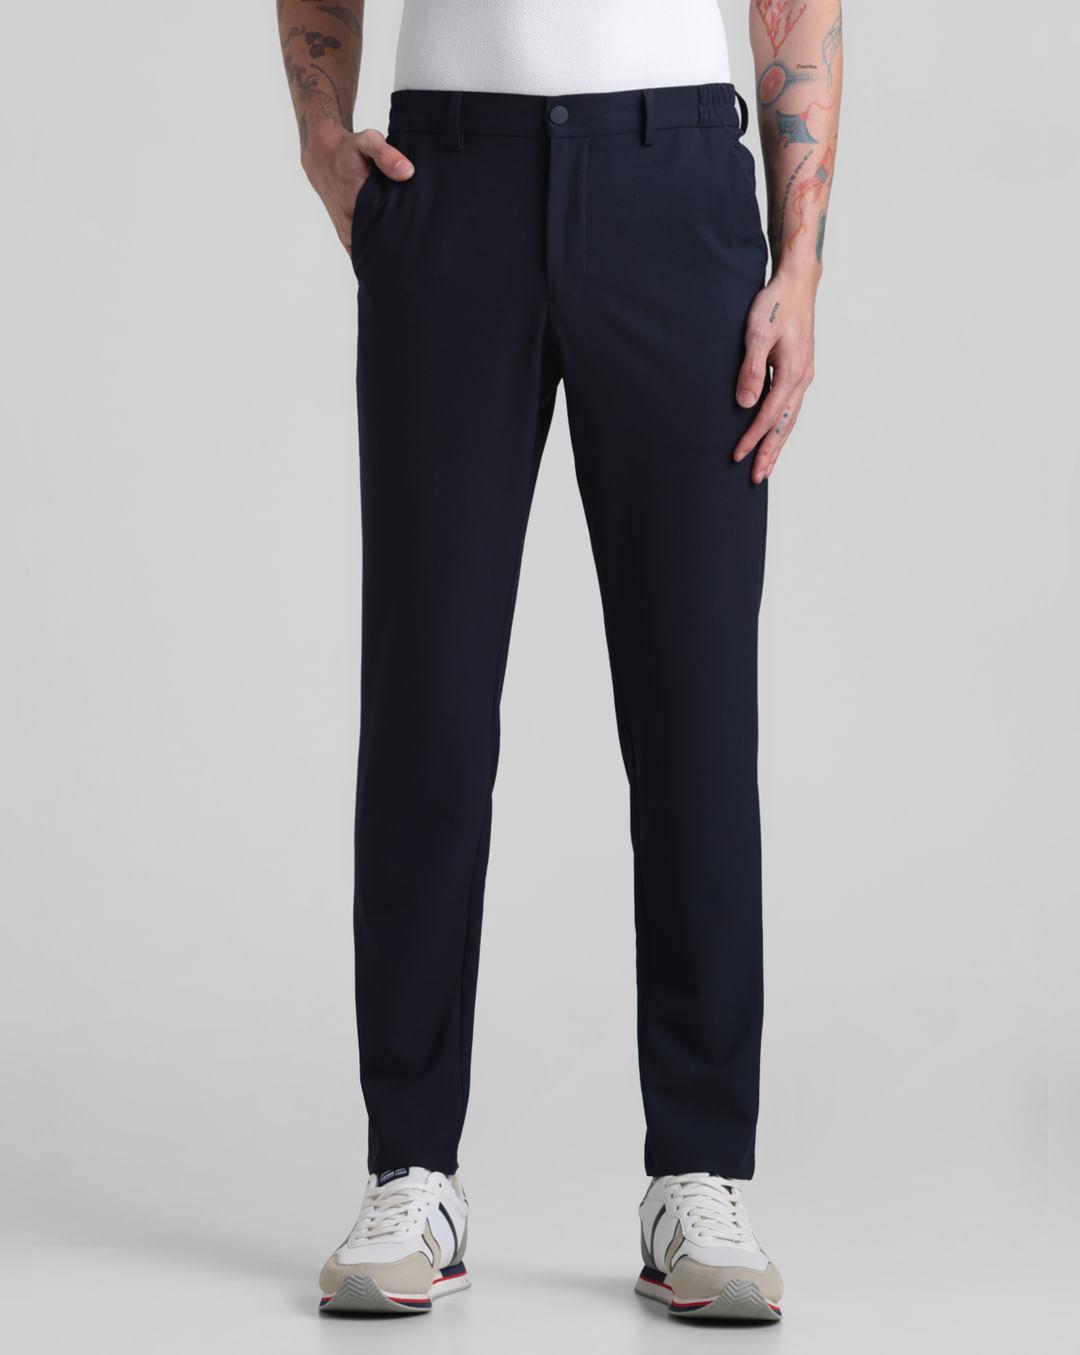 navy blue mid rise trousers